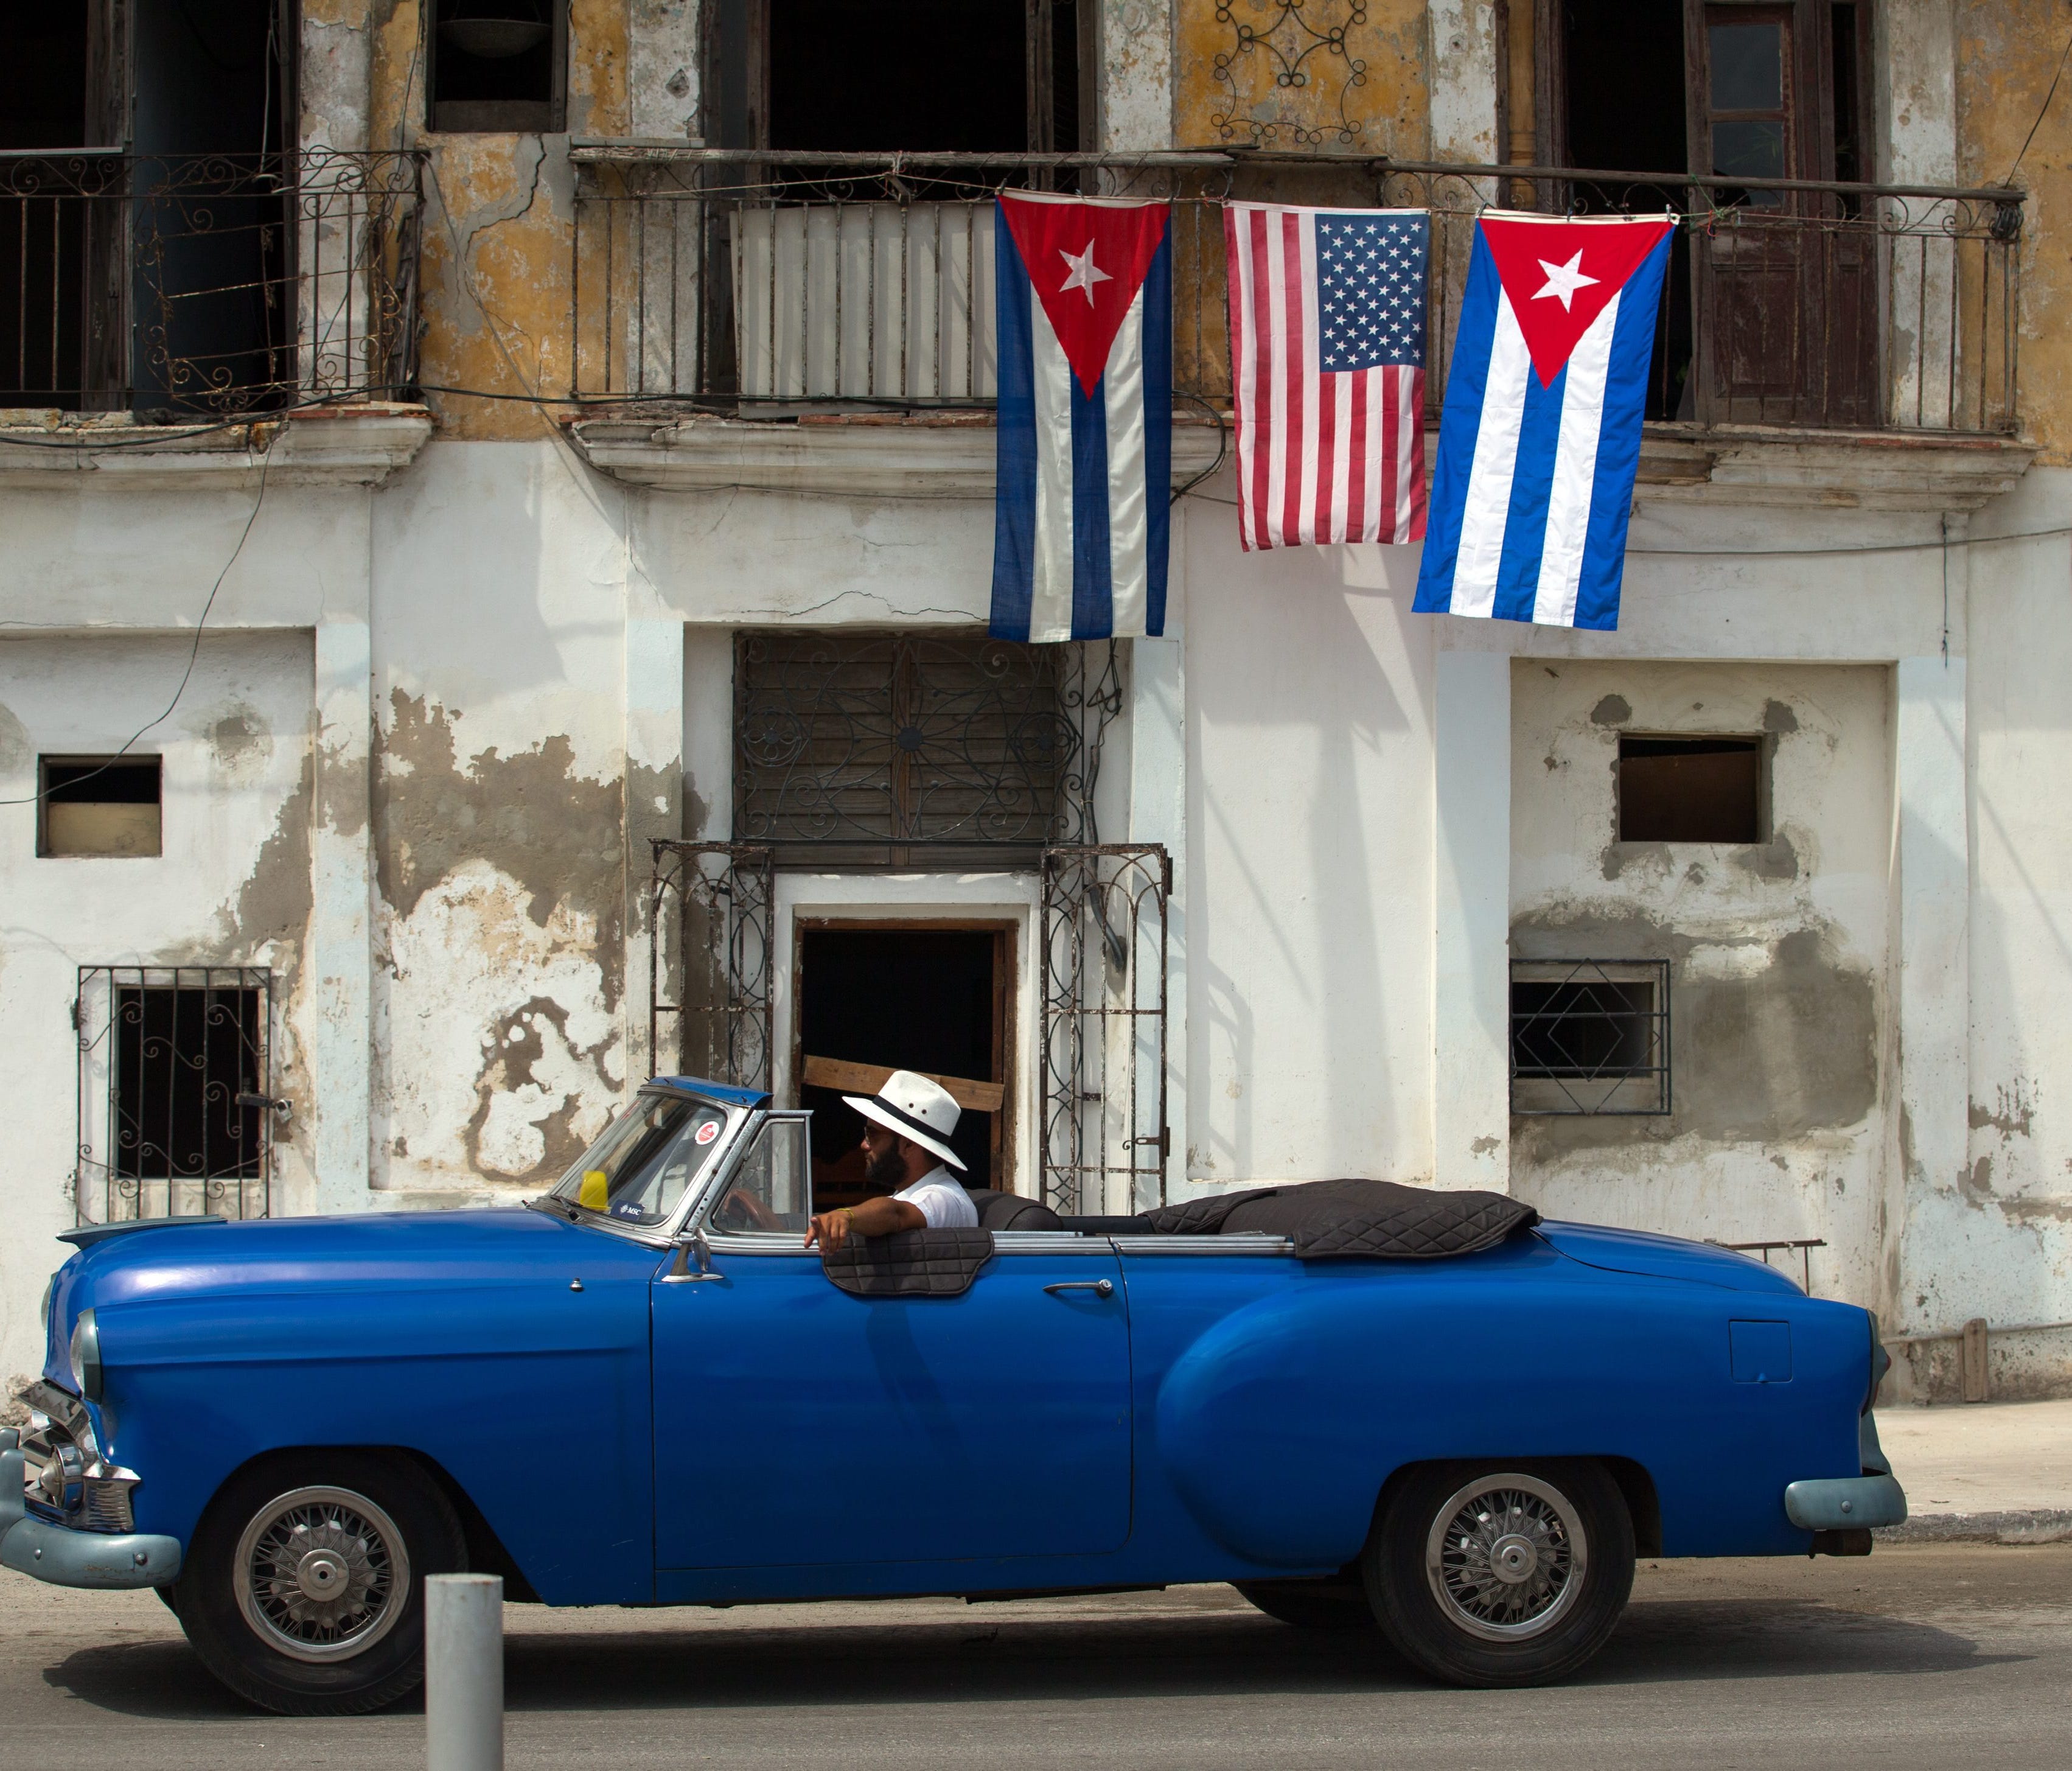 An old car passes by a house decorated with the flags of the United States and Cuba in Havana, Cuba, on March 20, 2016, as the island is preparing for the visit of US President Barack Obama. (EPA/ORLANDO BARRIA)